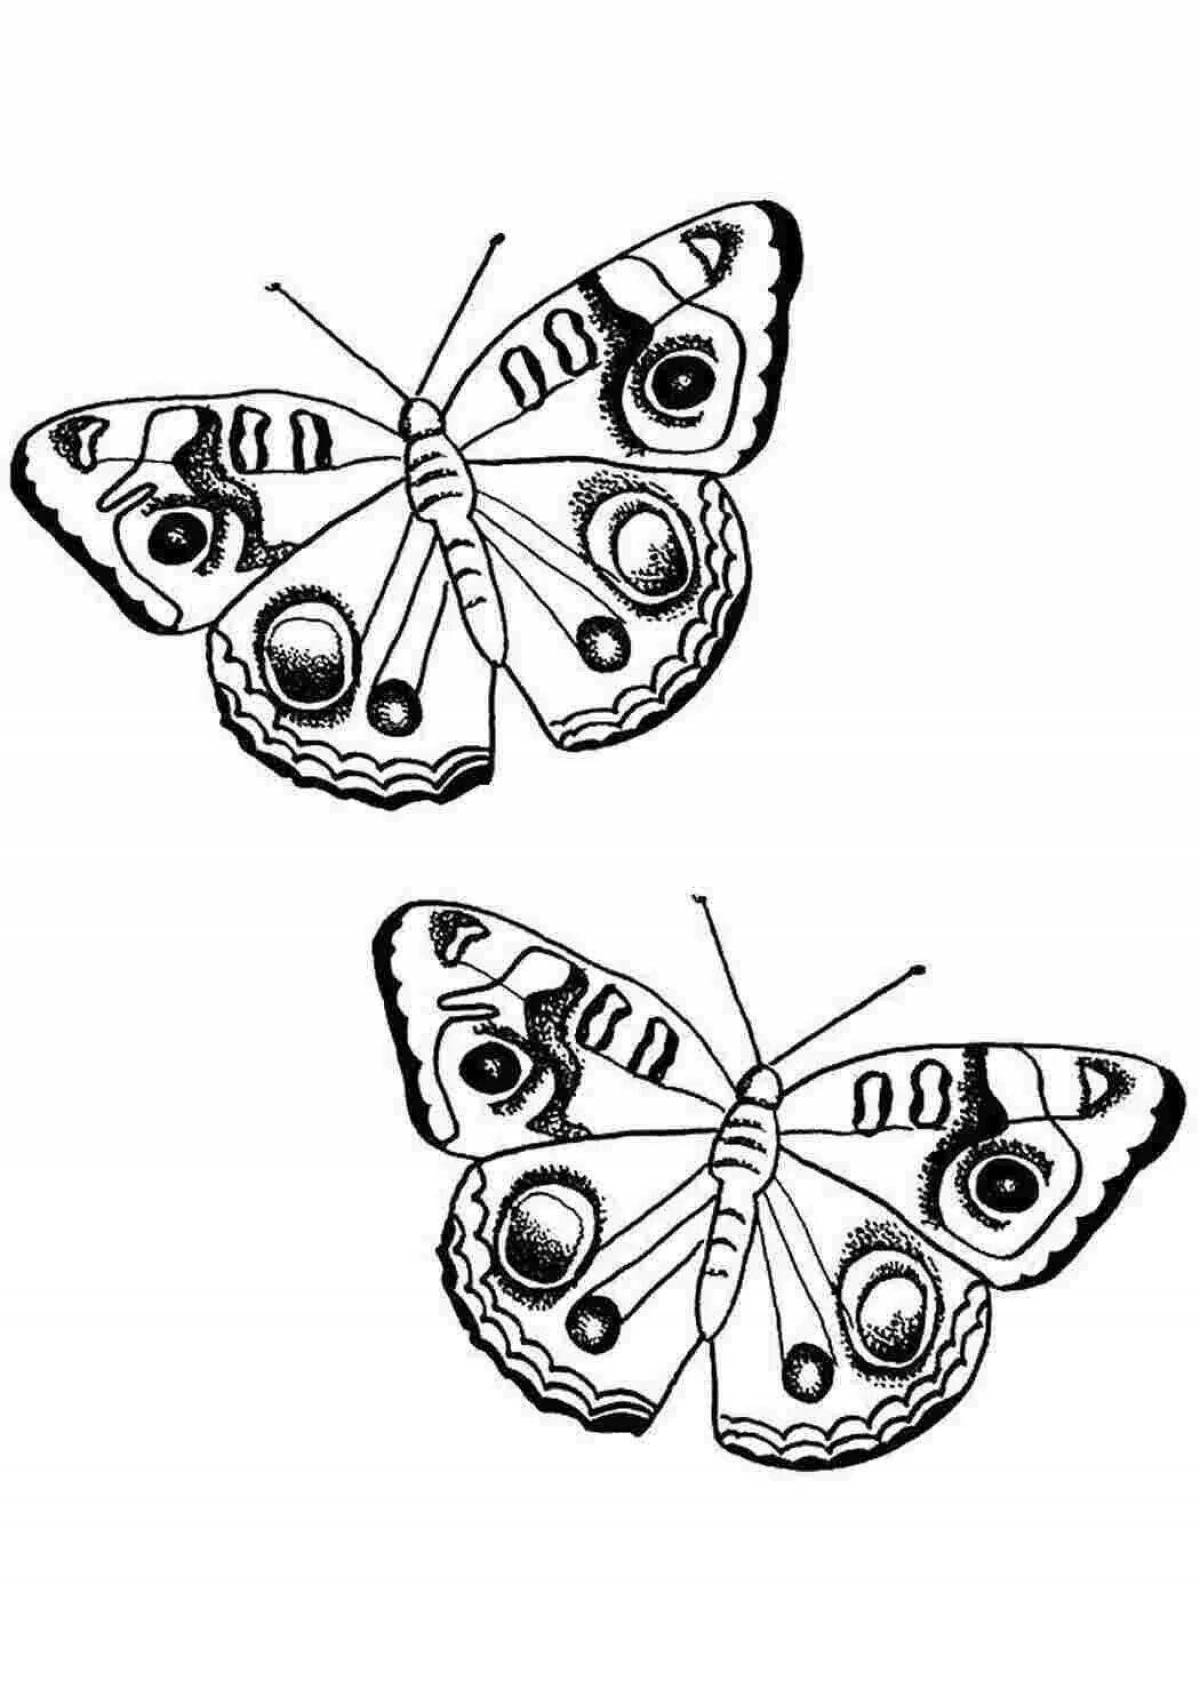 Peacock butterfly playful coloring page